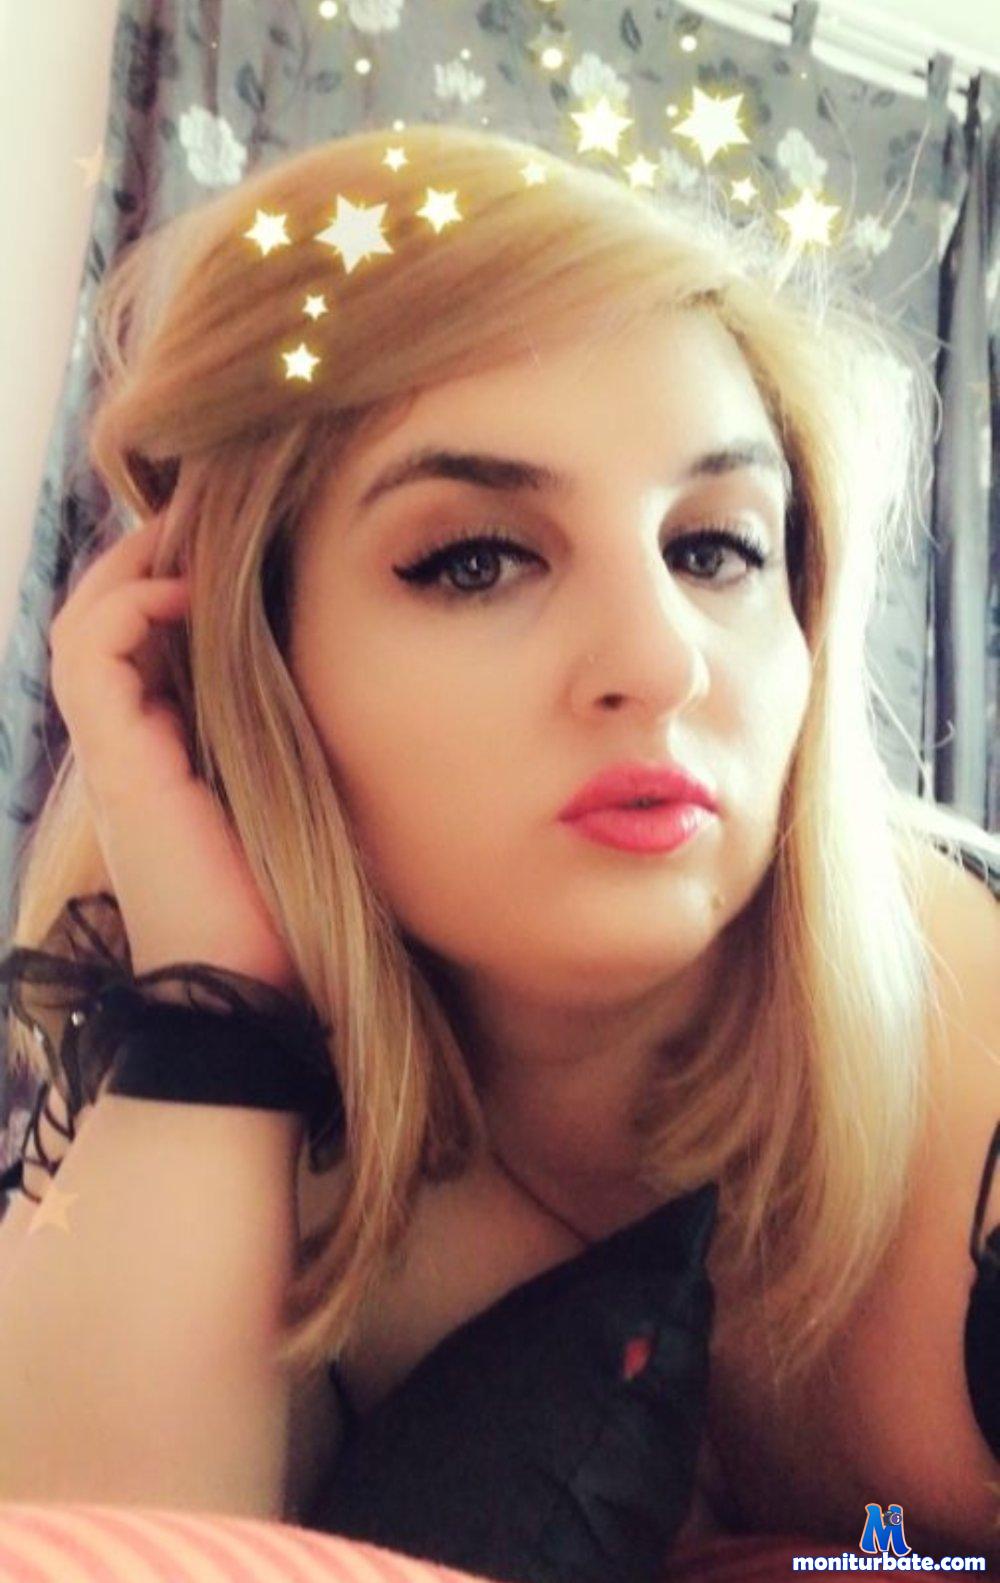 hot_jessica_tyler Stripchat performer girls age Young body Type Curvy hair Color Blonde auto Tag Interactive Toy do Play Games do Oil do Ohmibod auto Tag Lovense do Squirt do Cream Pie do Fingering specifics Big Ass specifics Big Tits specific Shaven auto Tag Hd christmas fetishes ethnicity White hair Color Red do Talk do Topless do Twerk do Sex Toys do Anal do Blowjob do Foot Fetish do Anal Plug do Dildo do Nipple Toys do Deep Throat do Doggy Style subculture Bdsm do Masturbation tag Language Romanian do Smoking hair Color Black specific Small Tits auto Tag Recordable Private do Titty Fuck sexting do Gag heels private Price Sixteen To Twenty Four small Audience do69 Position do Fuck Machine hair Color Colorful nylon subculture Slave auto Tag P2 P do Oil Show do Dildo Or Vibrator do Anal Toys do Gagging do Cumshot do Cowgirl do Handjob do Kissing do Ass To Mouth do Spanking do Facesitting do Swallow do Facial do Double Penetration do Ejaculation do Pussy Licking fuck Machine auto Tag Recordable Public